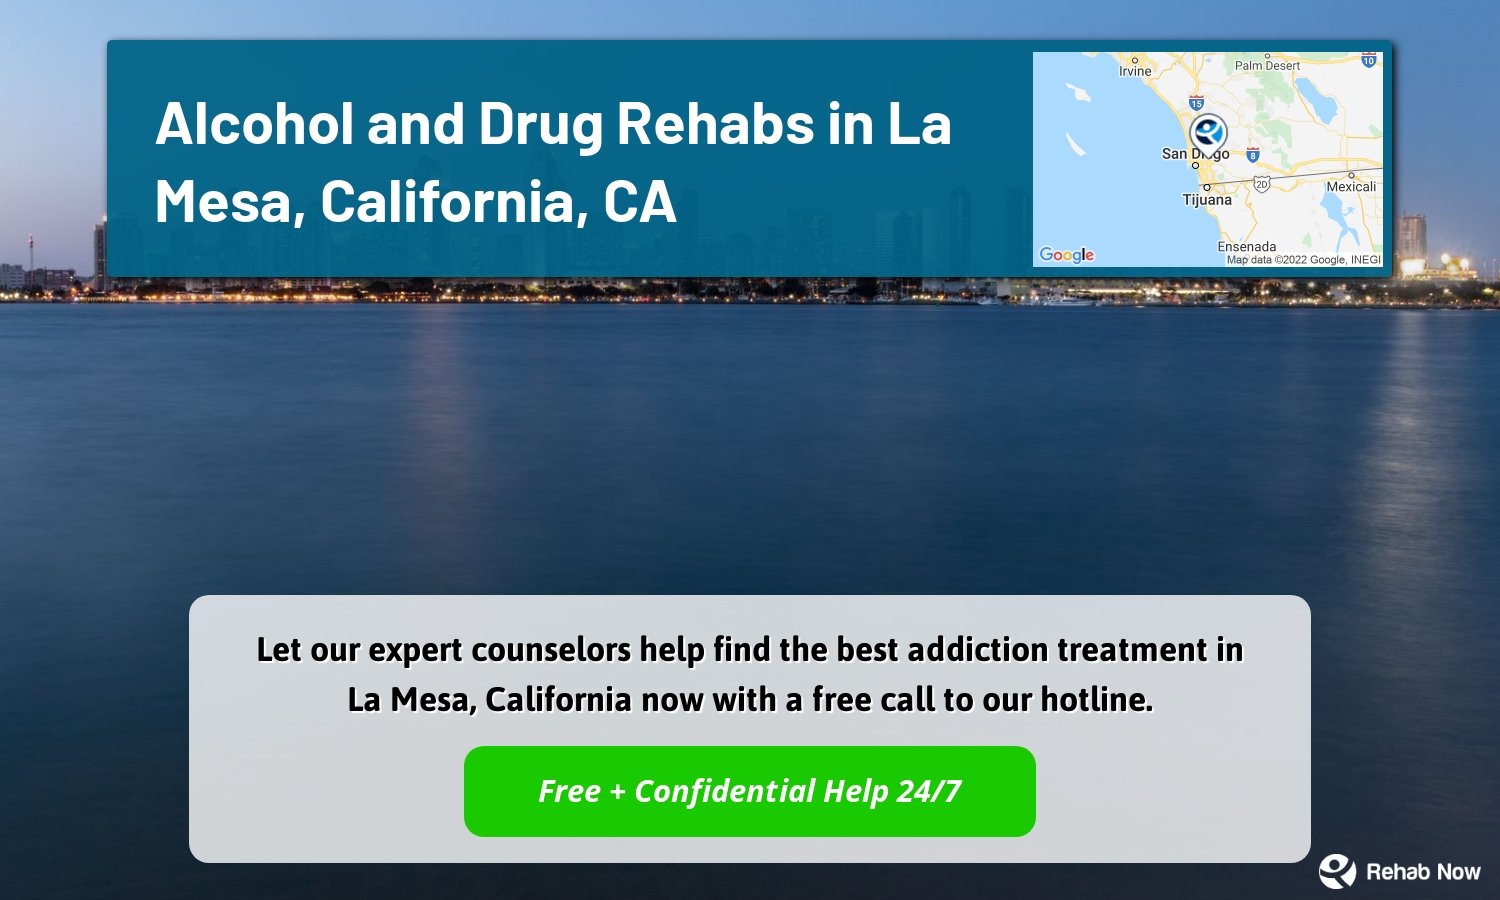 Let our expert counselors help find the best addiction treatment in La Mesa, California now with a free call to our hotline.